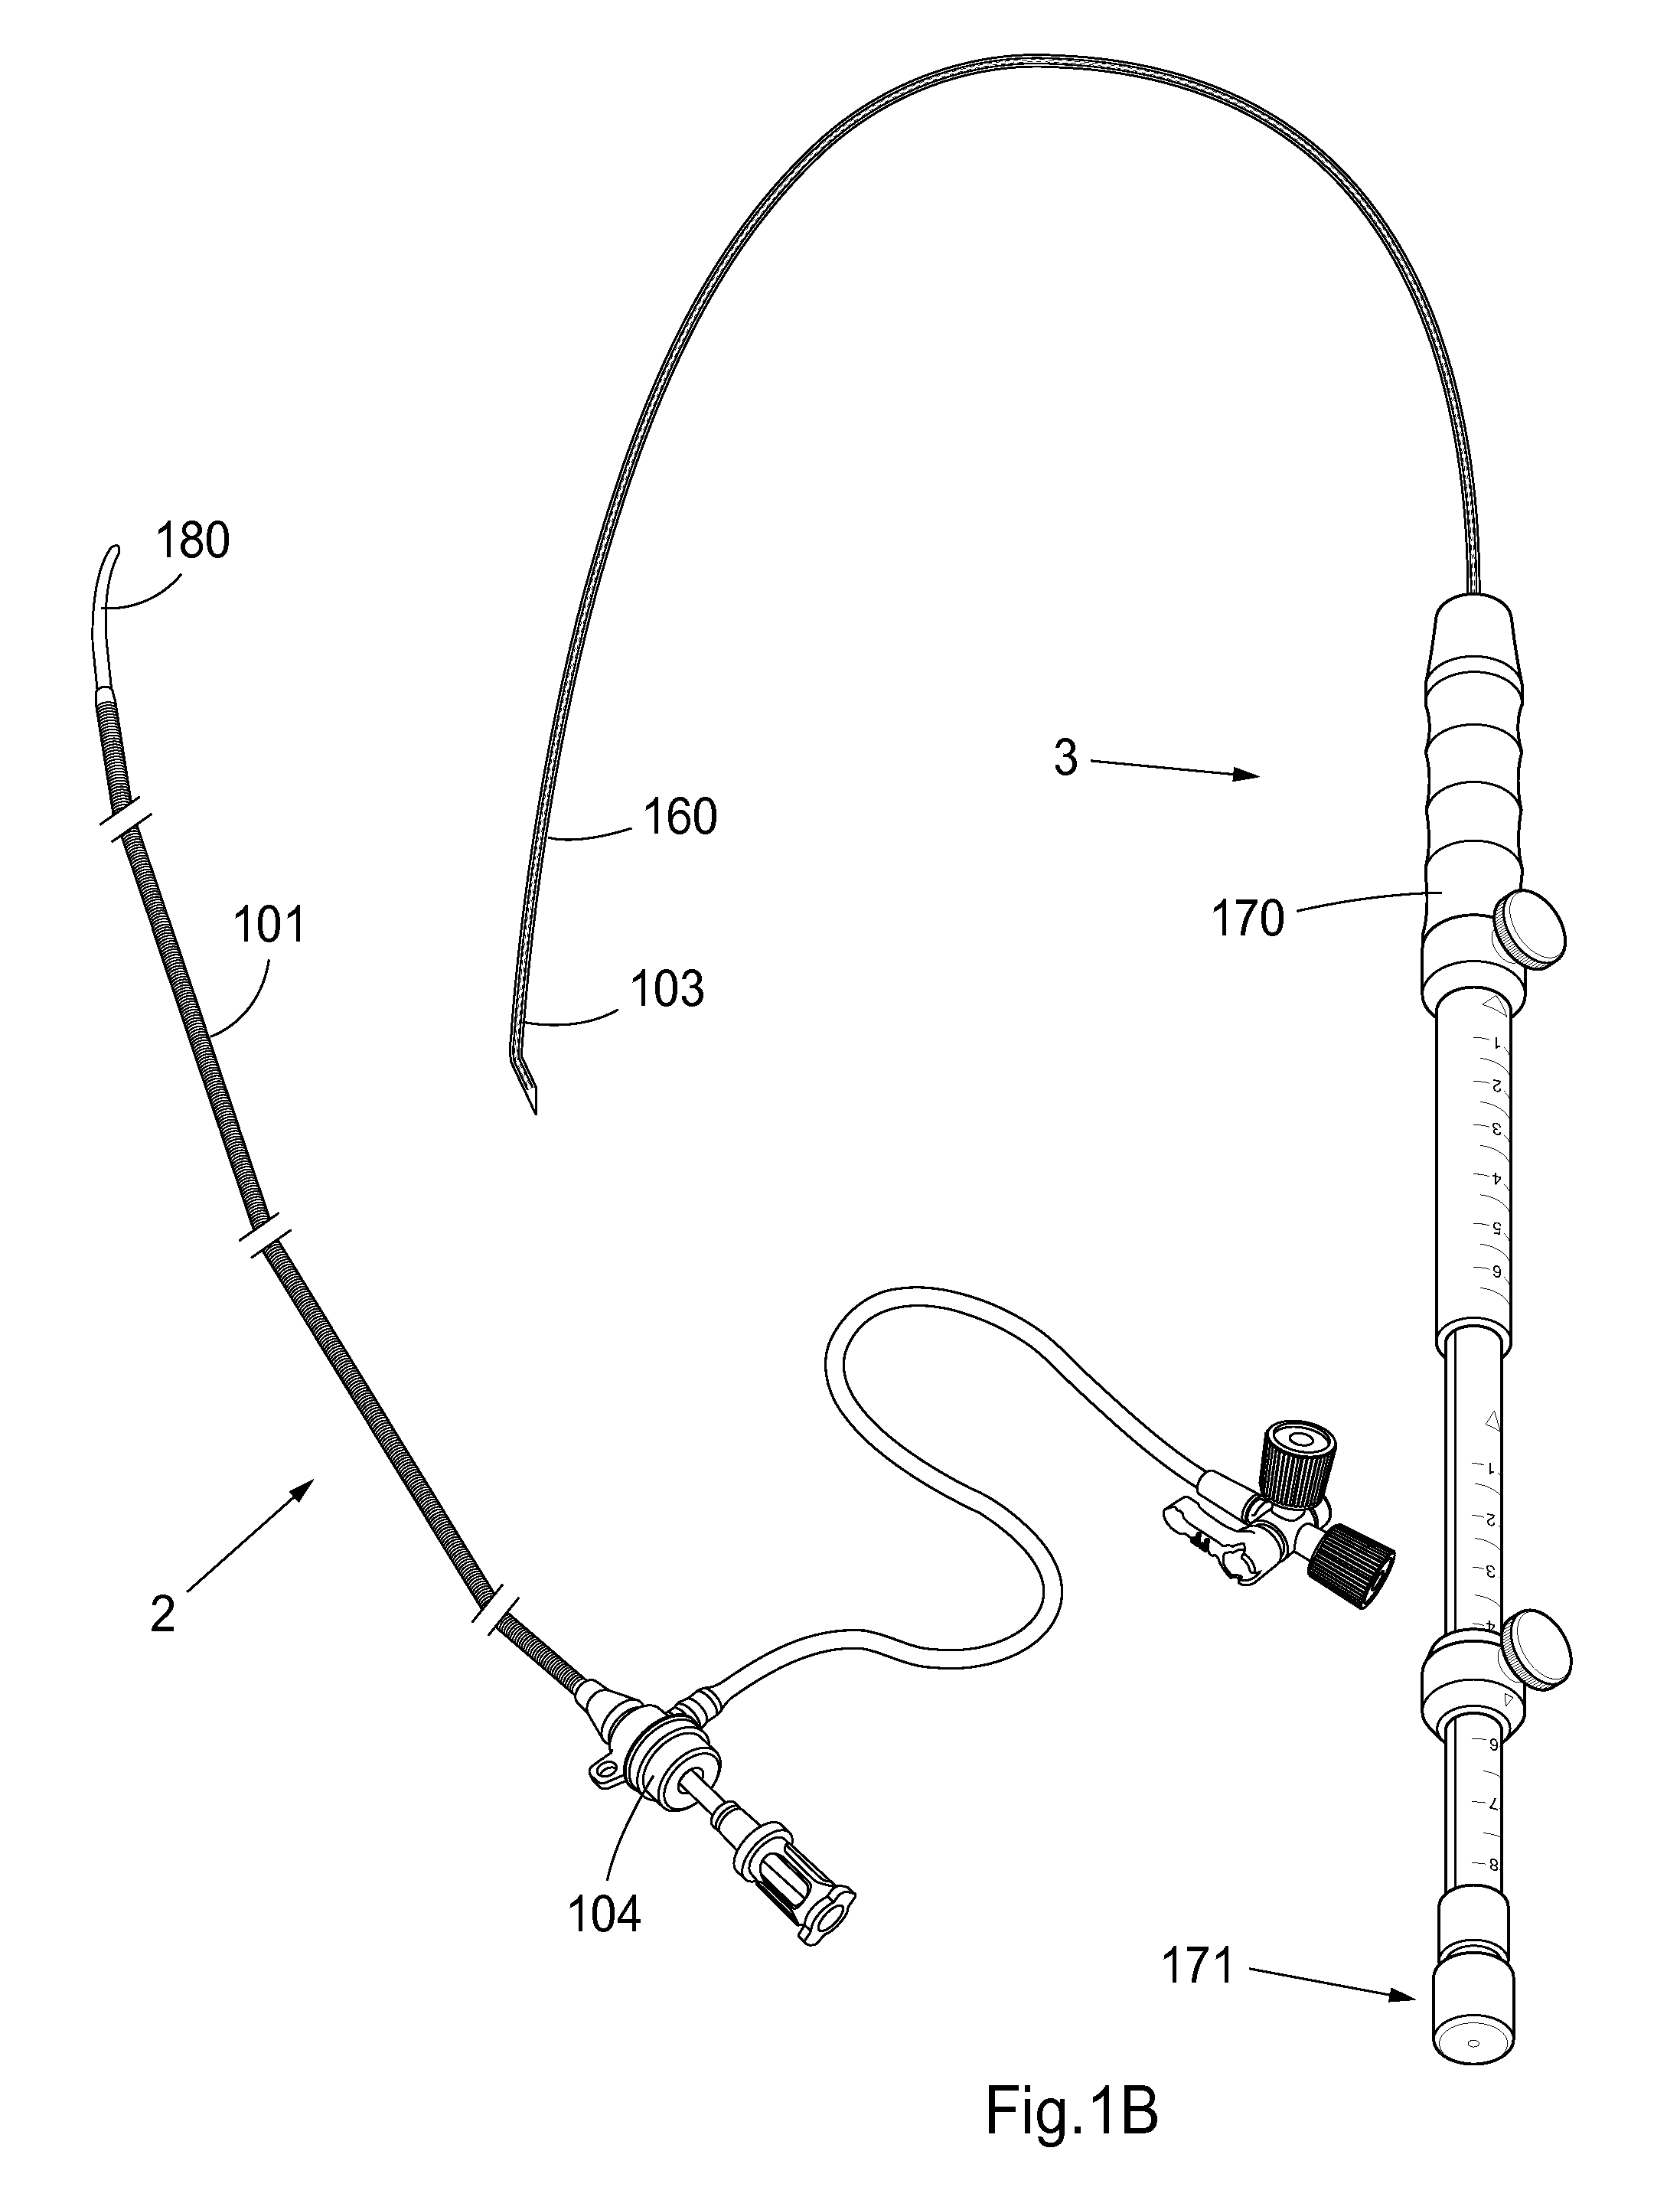 Device, system, kit, and method for epicardial access